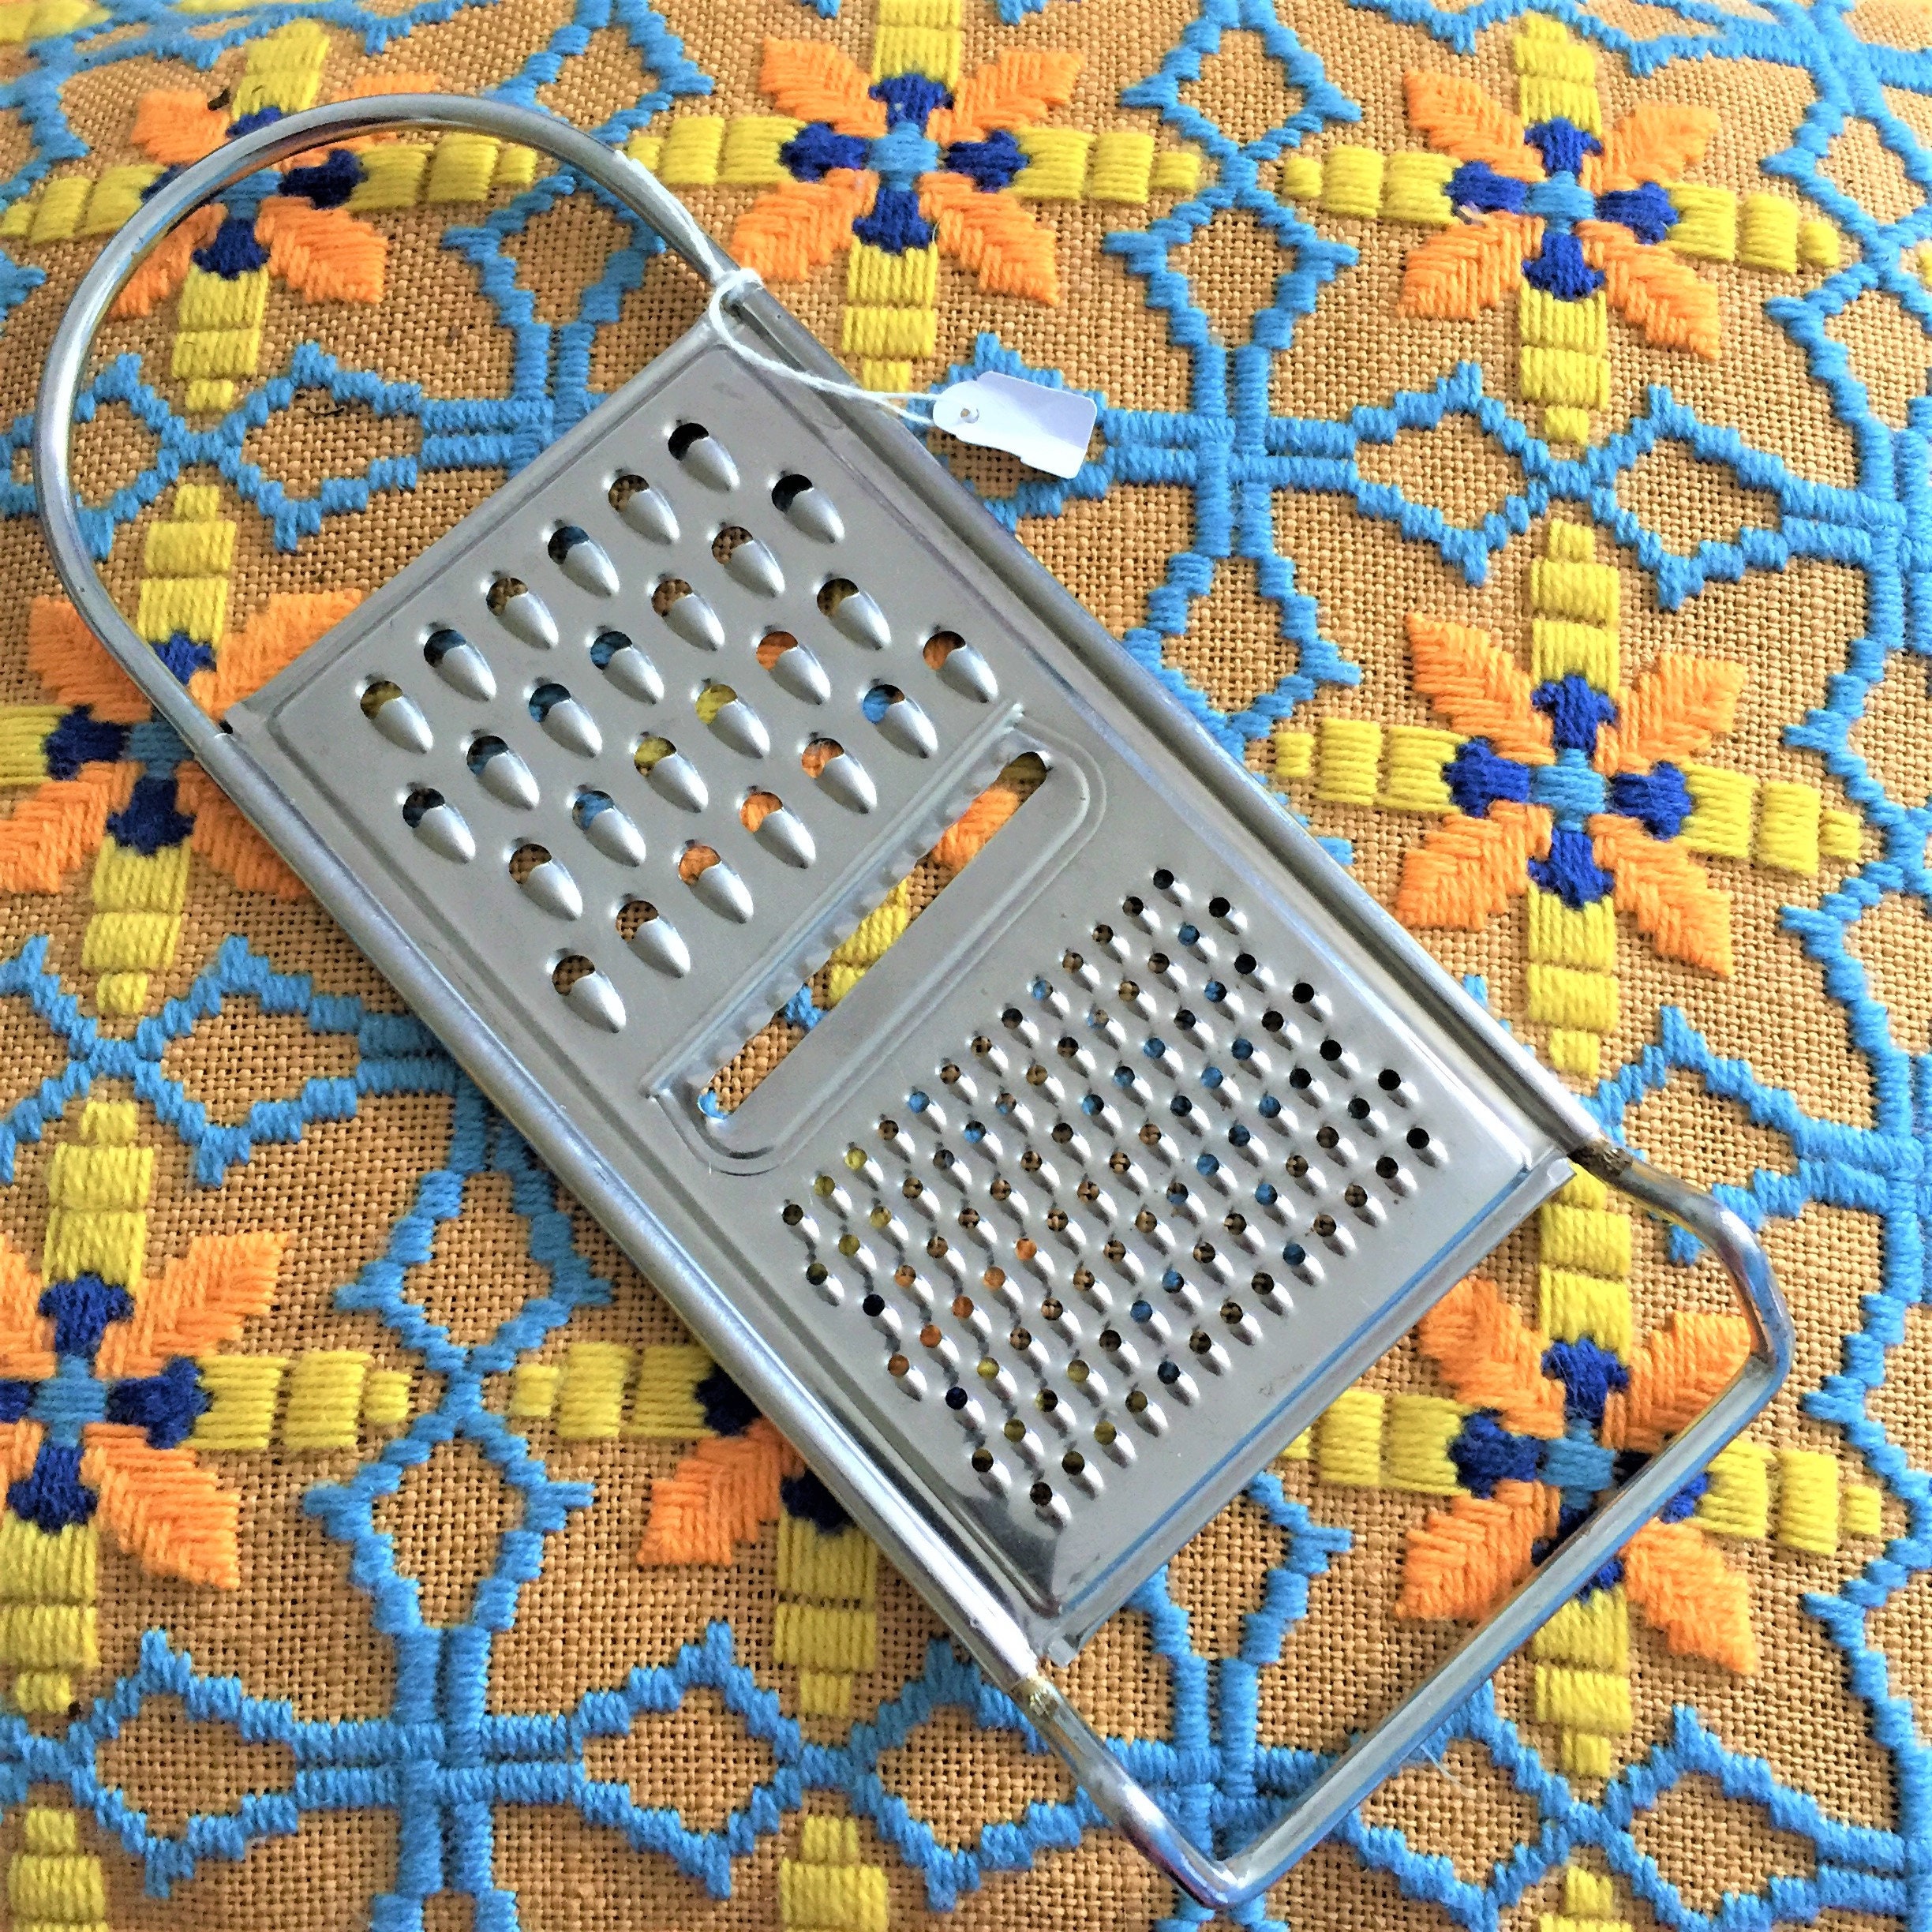 ZYLISS Original Cheese Grater - White, 1 EA